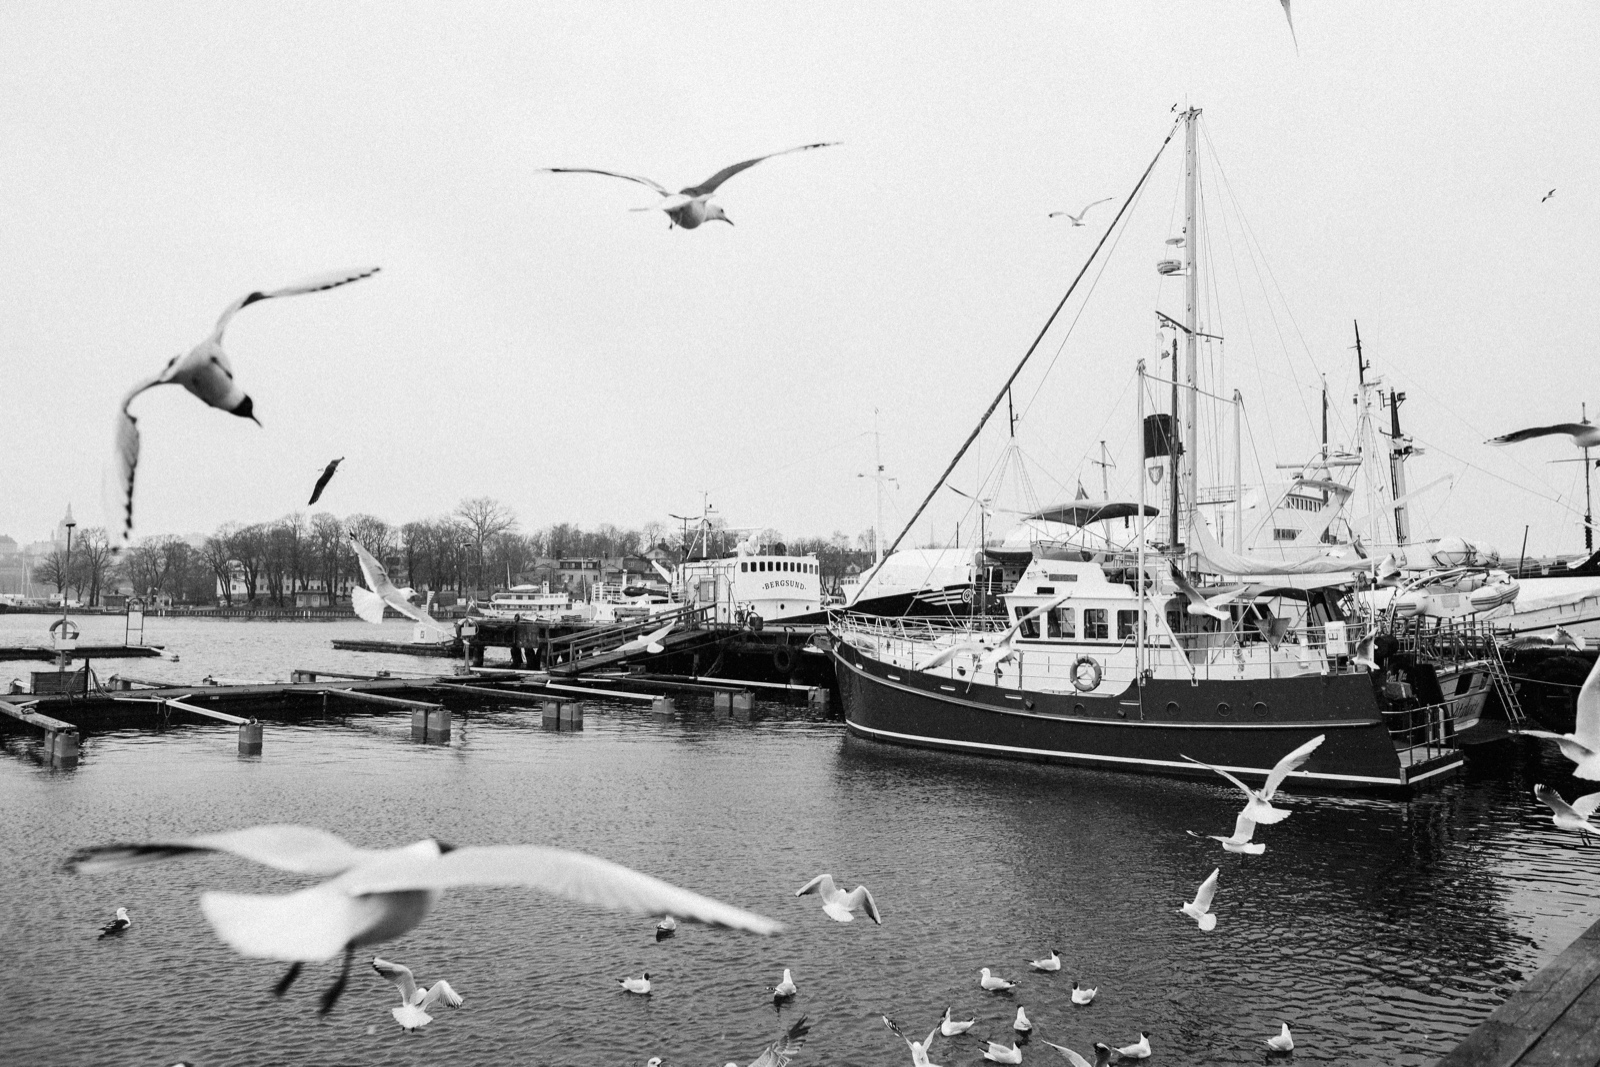 seaguls flying over Stockholm in black and white